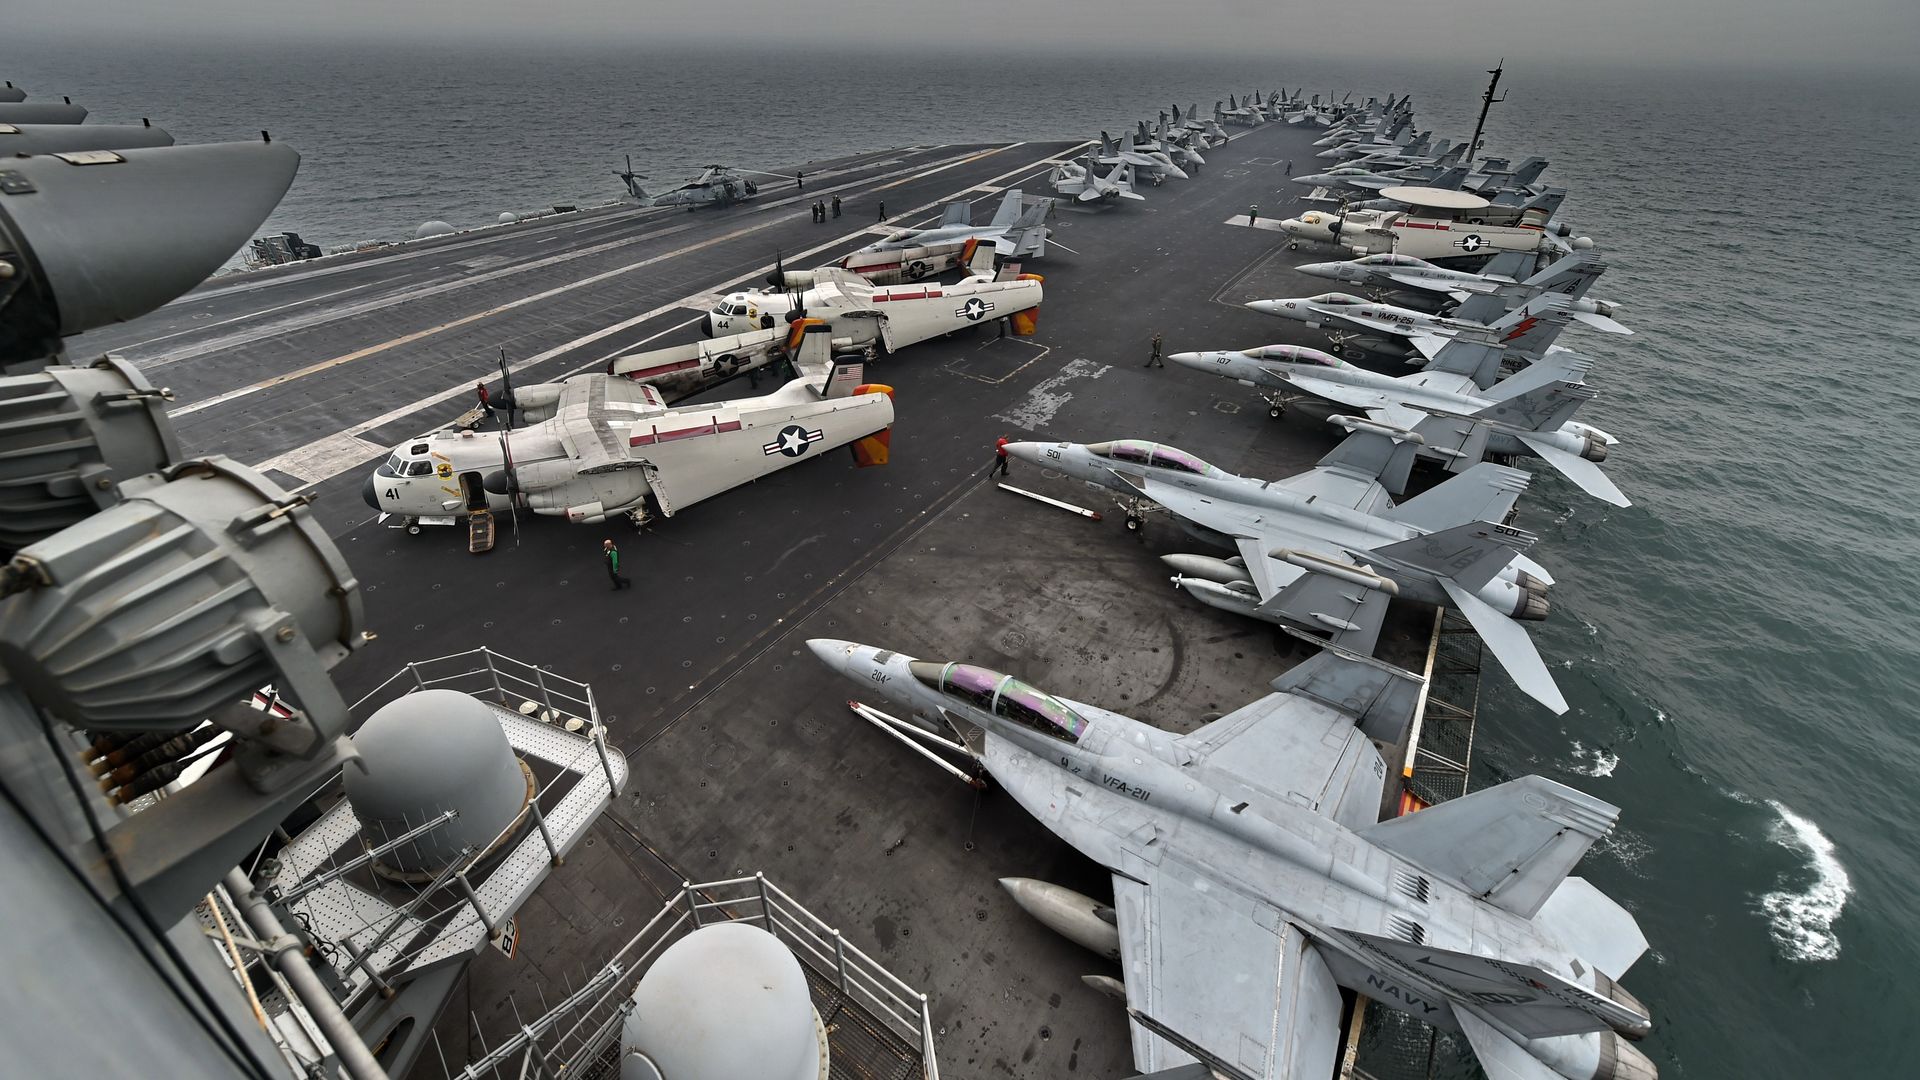 A general view shows the flight deck on board the aircraft carrier USS Theodore Roosevelt (CVN 71)